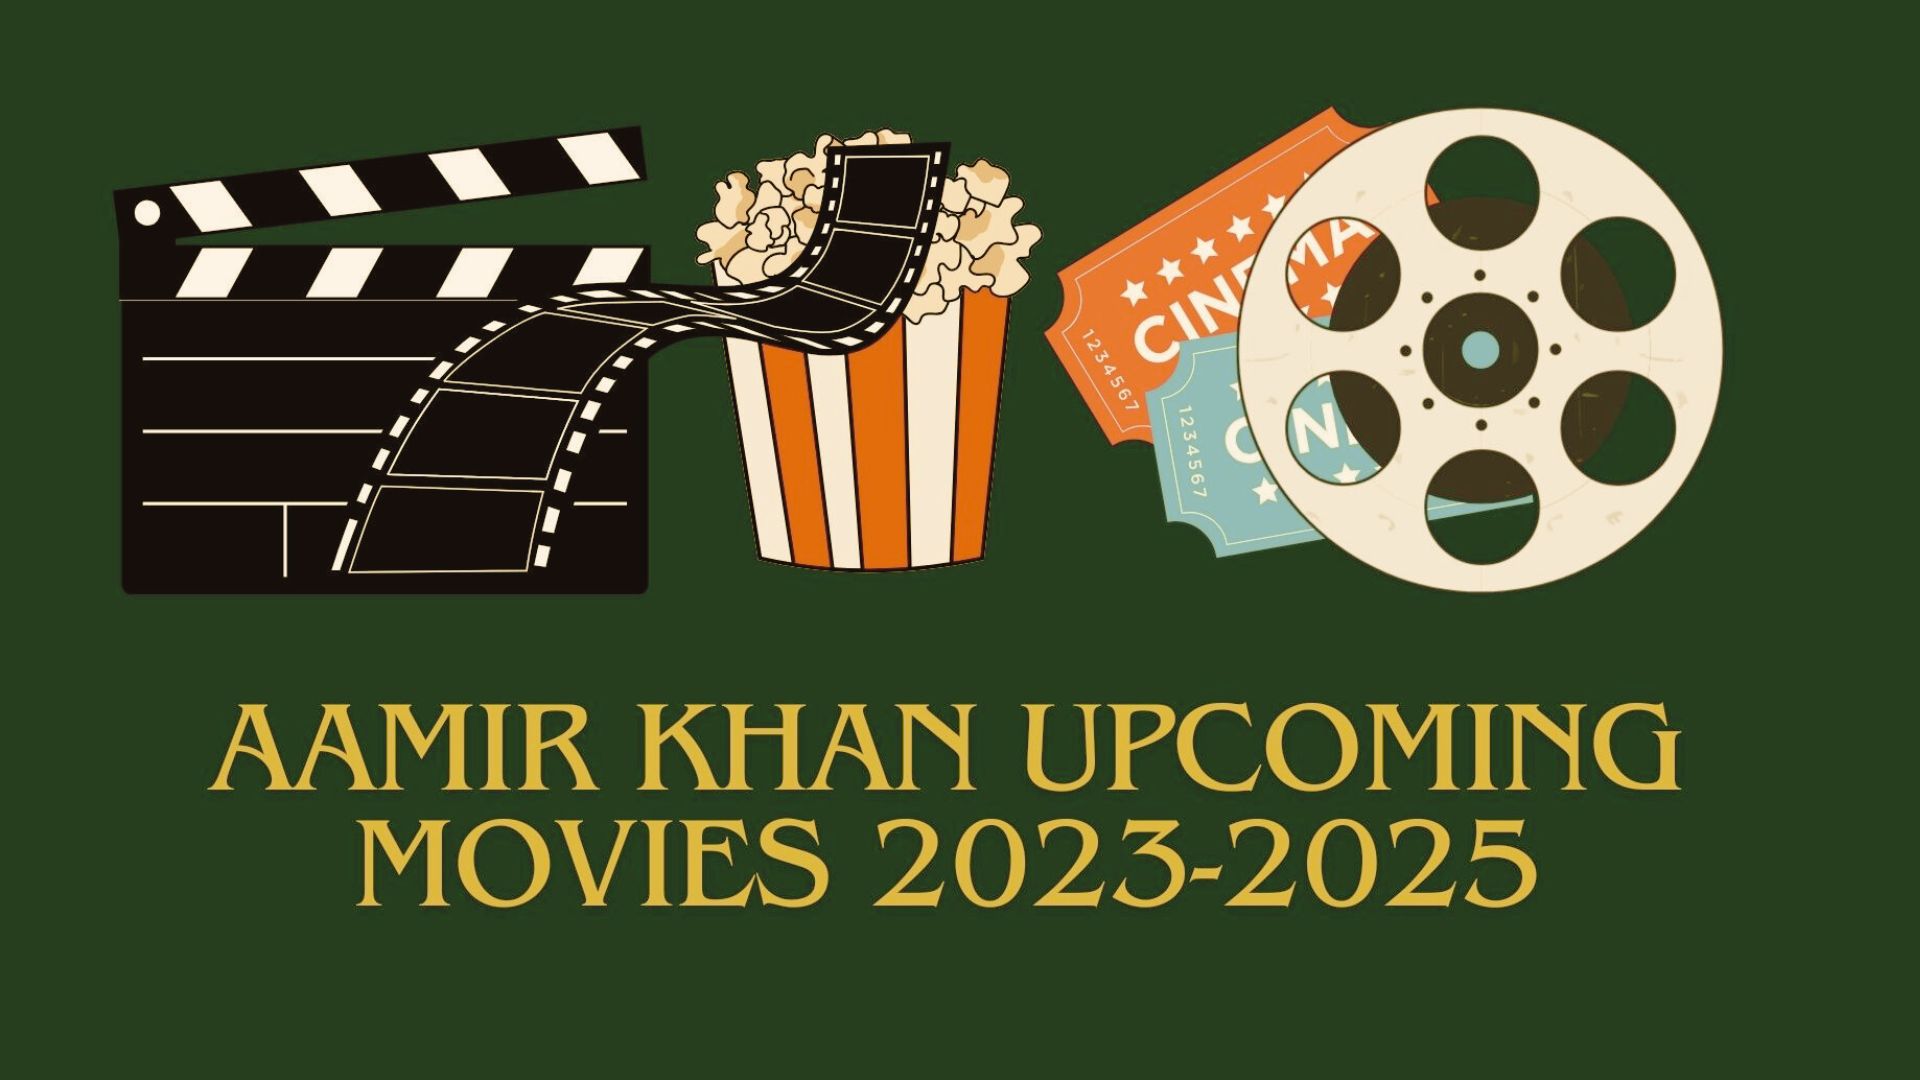 Stay updated with Aamir Khan's upcoming movies from 2023 to 2025 on our website.